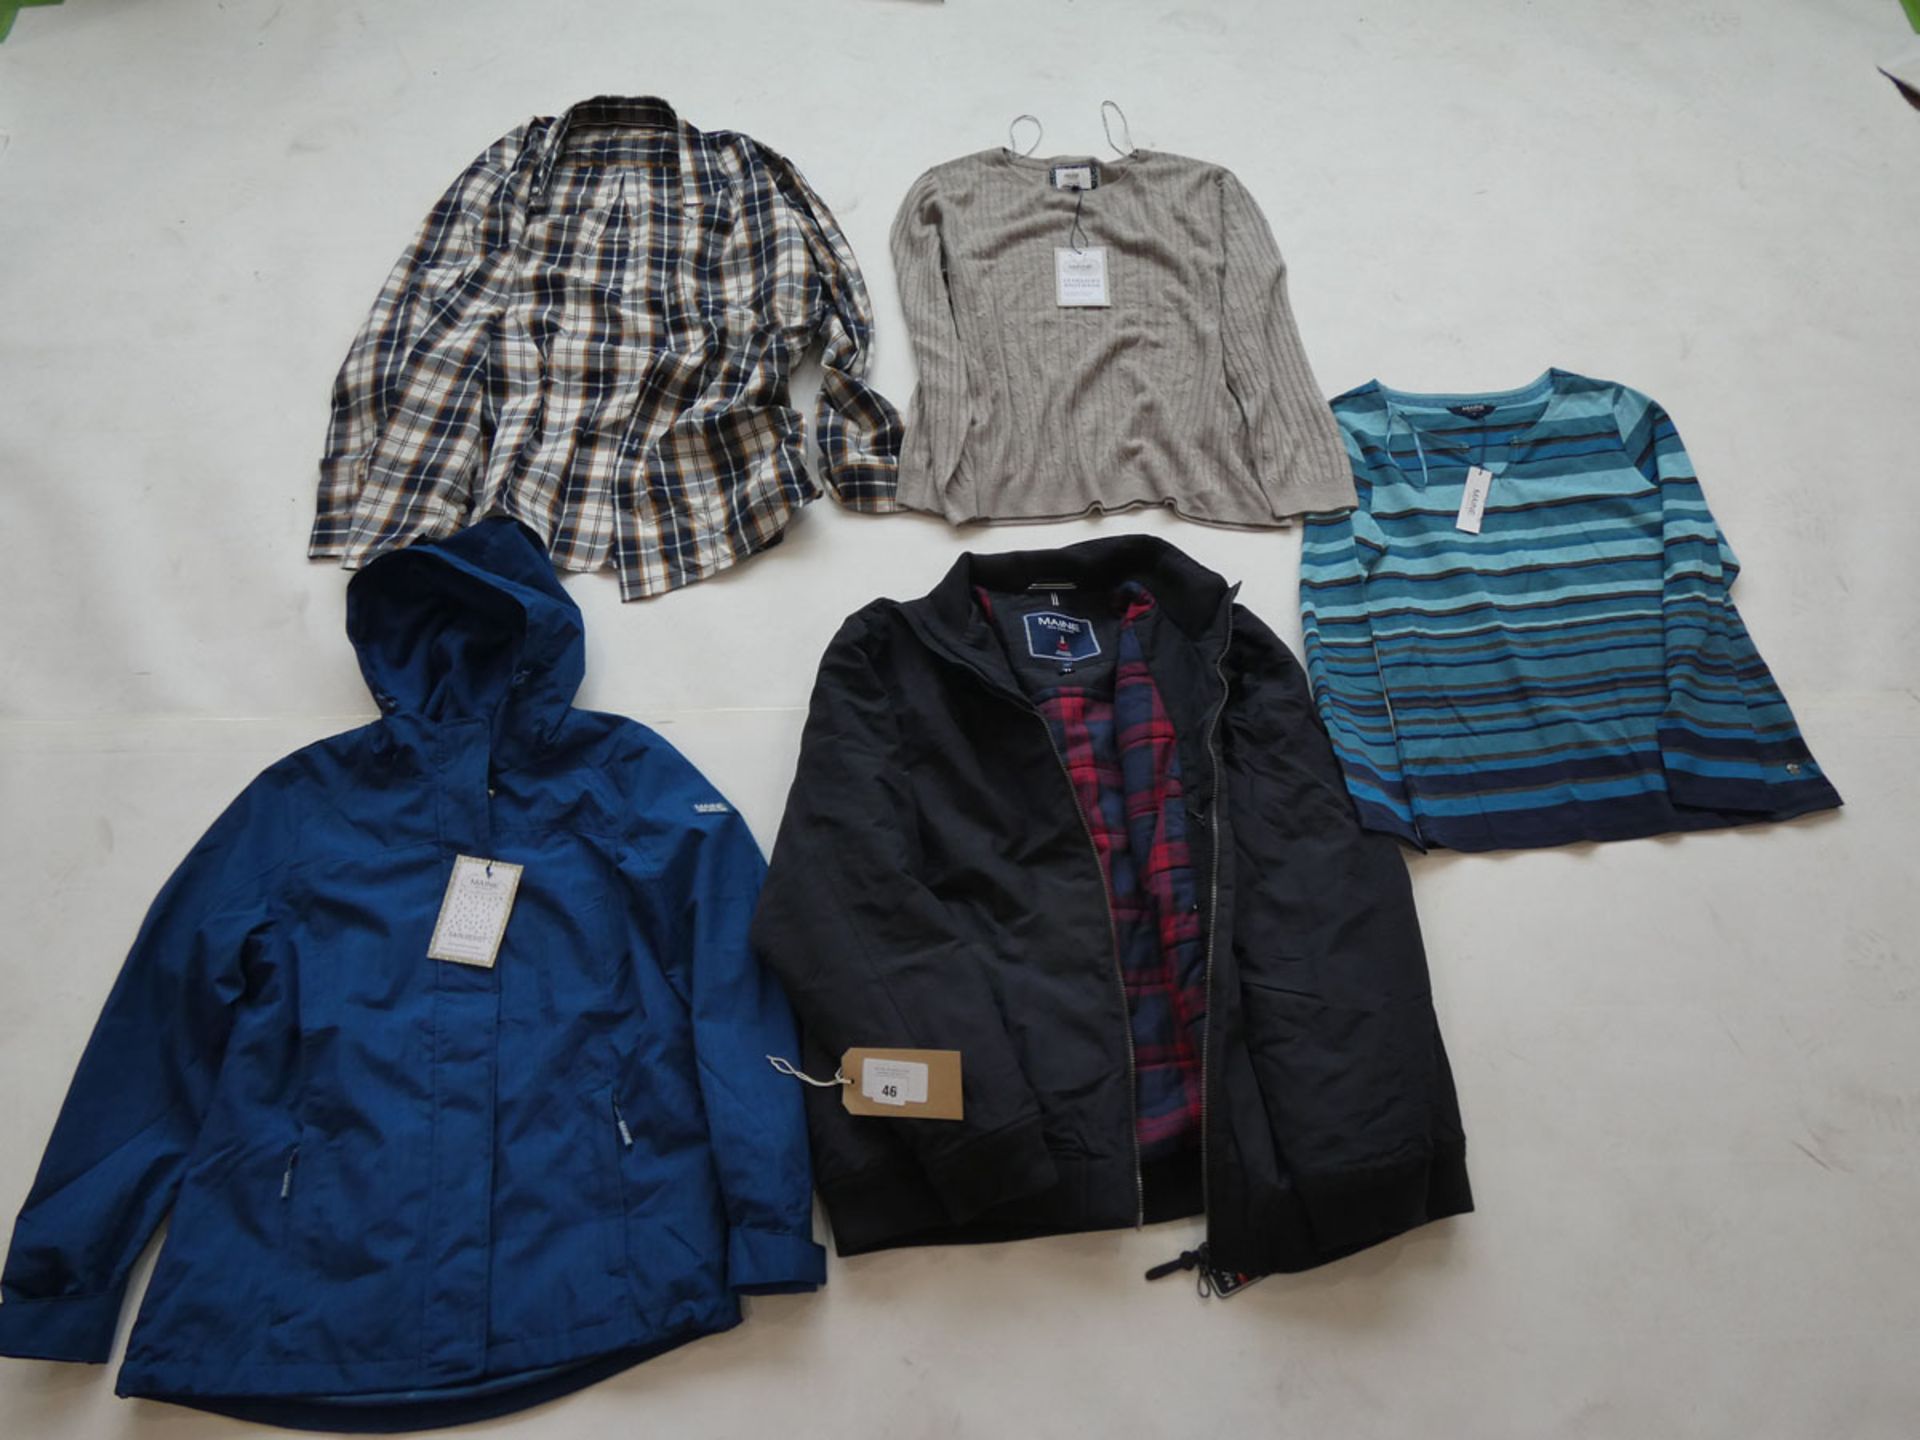 Selection of Maine clothing to include tops and jackets sizes 12, 16, 20 and XXL